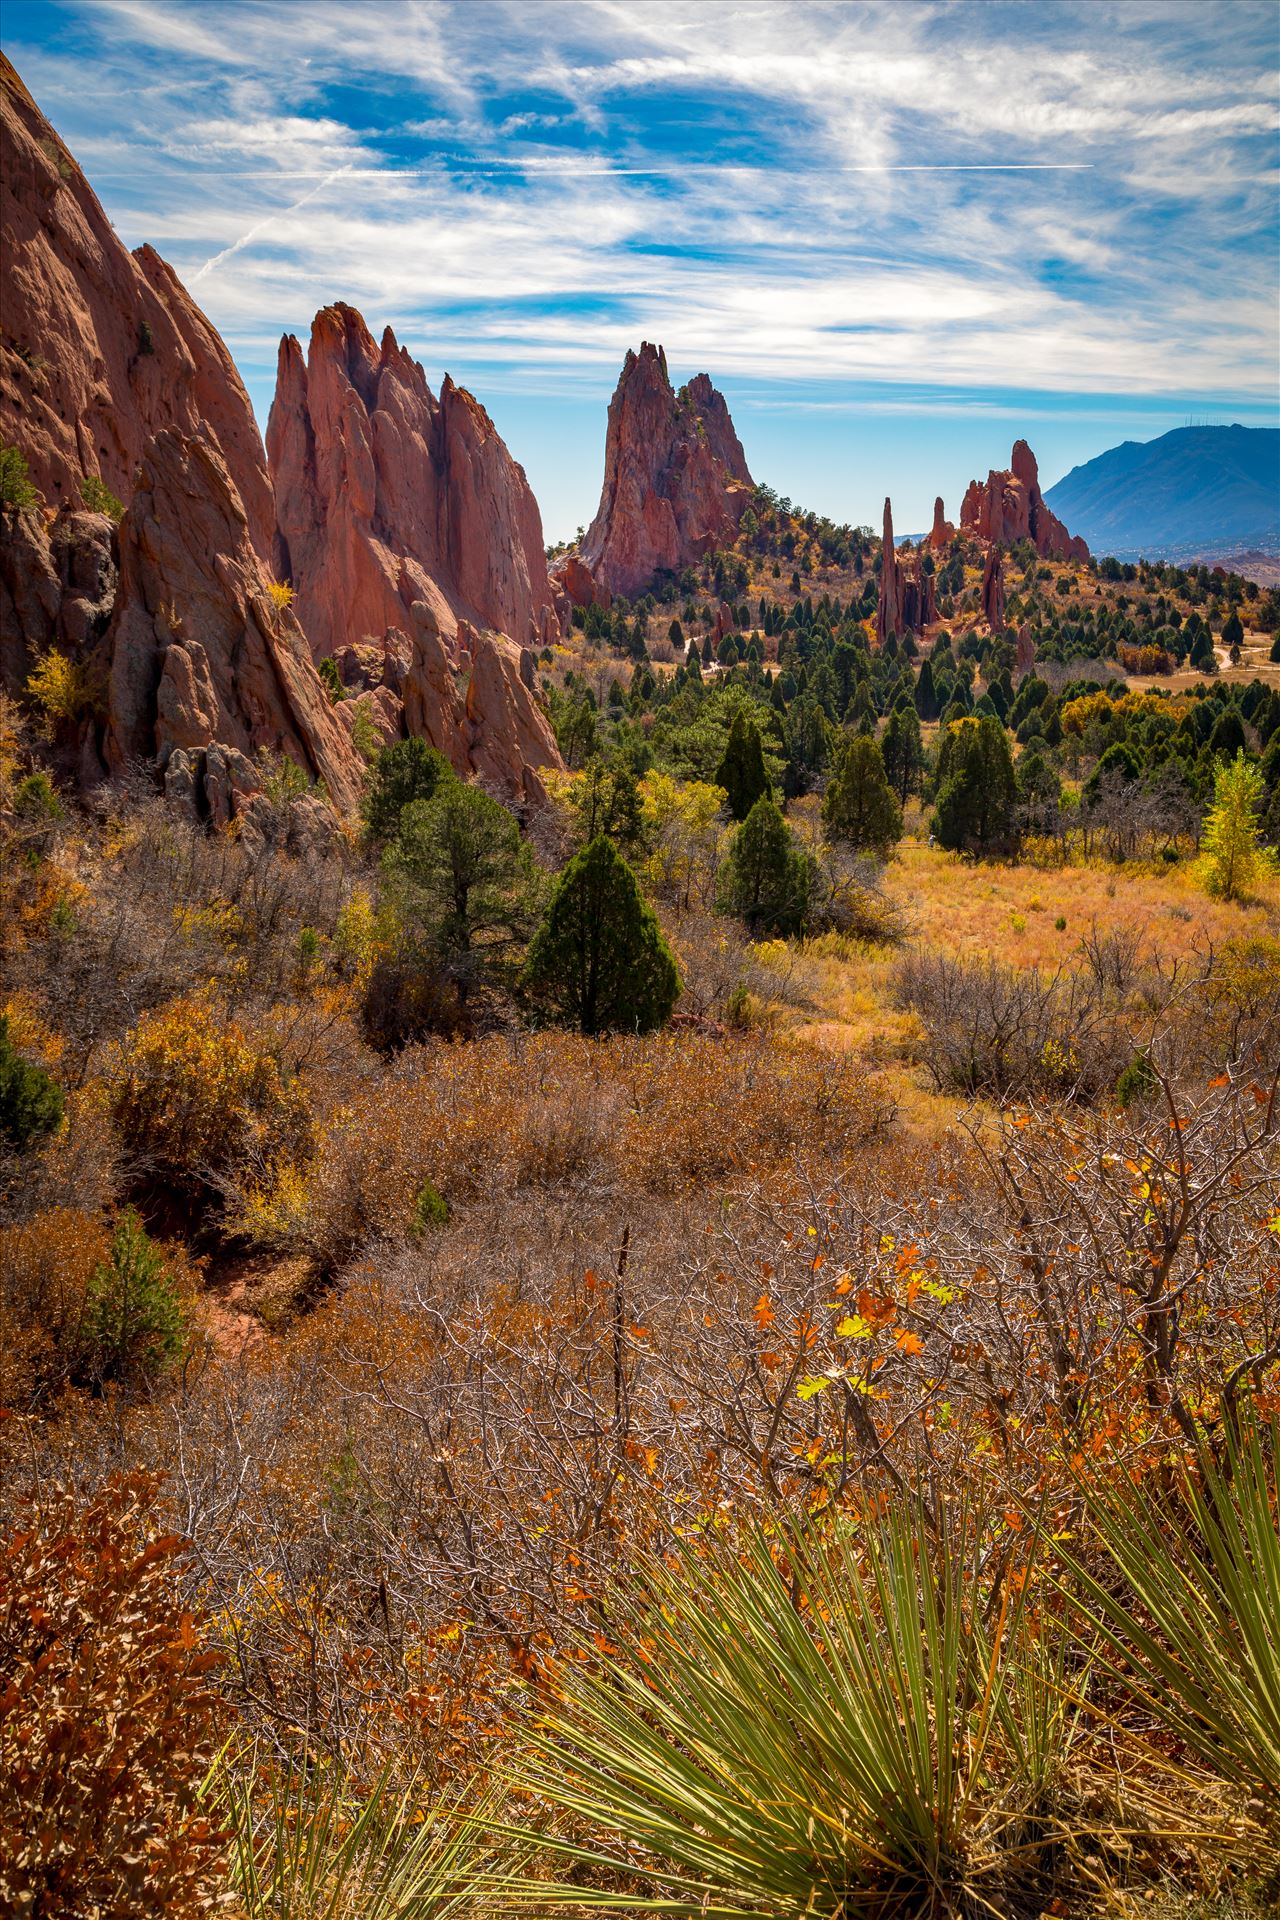 Garden of the Gods Spires - The spires at the Garden of the Gods. by Scott Smith Photos